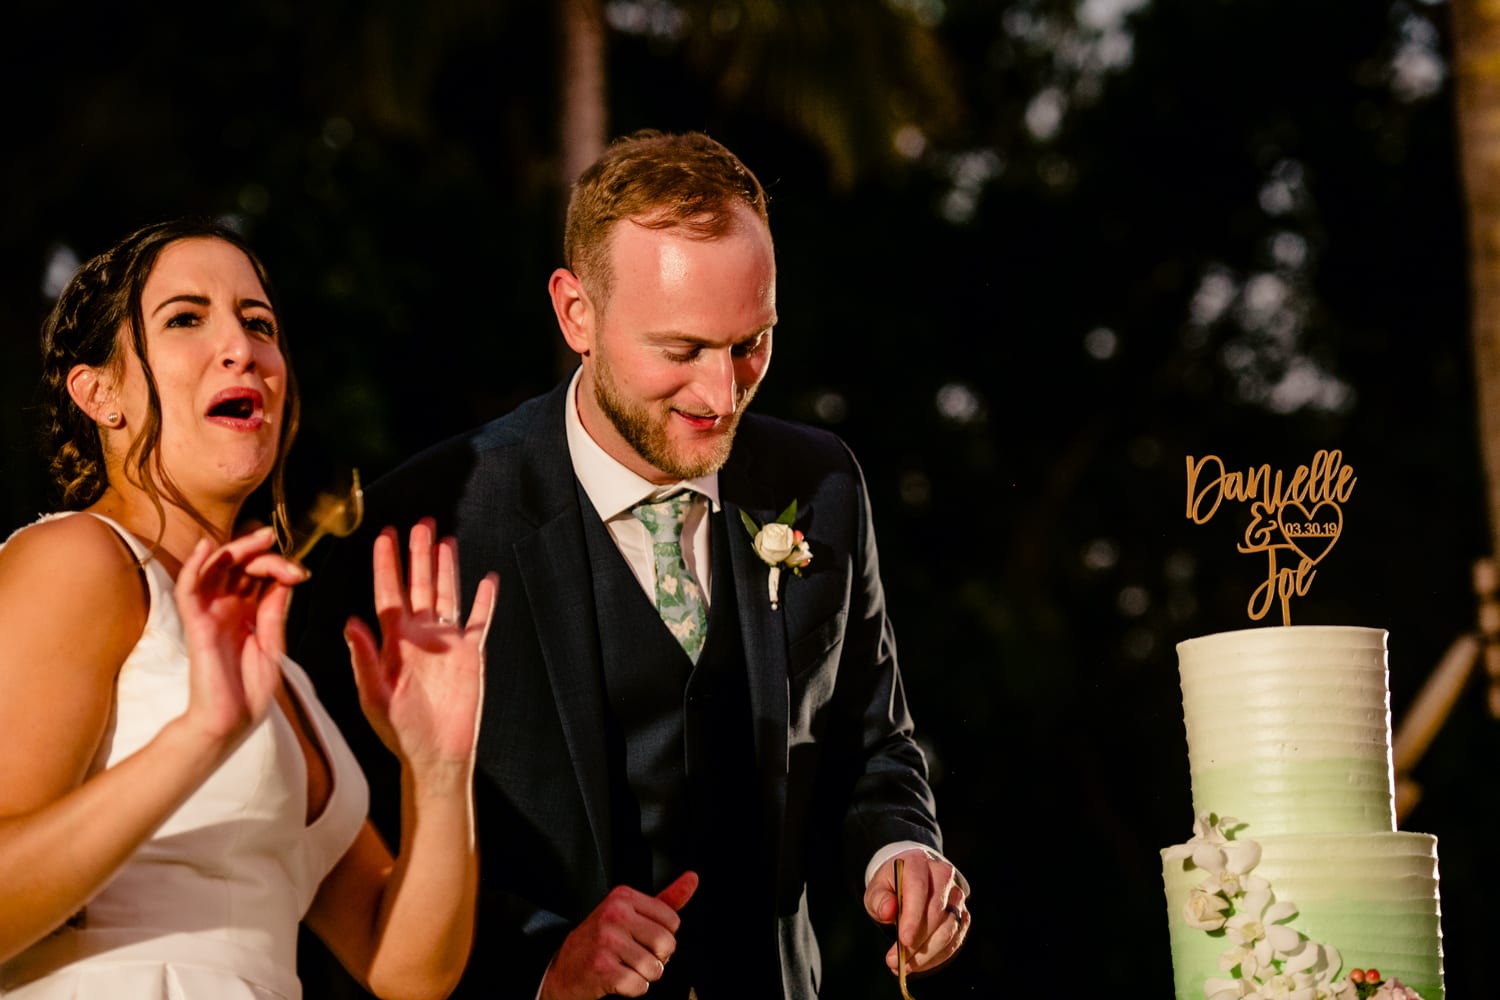 A wedding cake being cut at Bakers Cay Resort.